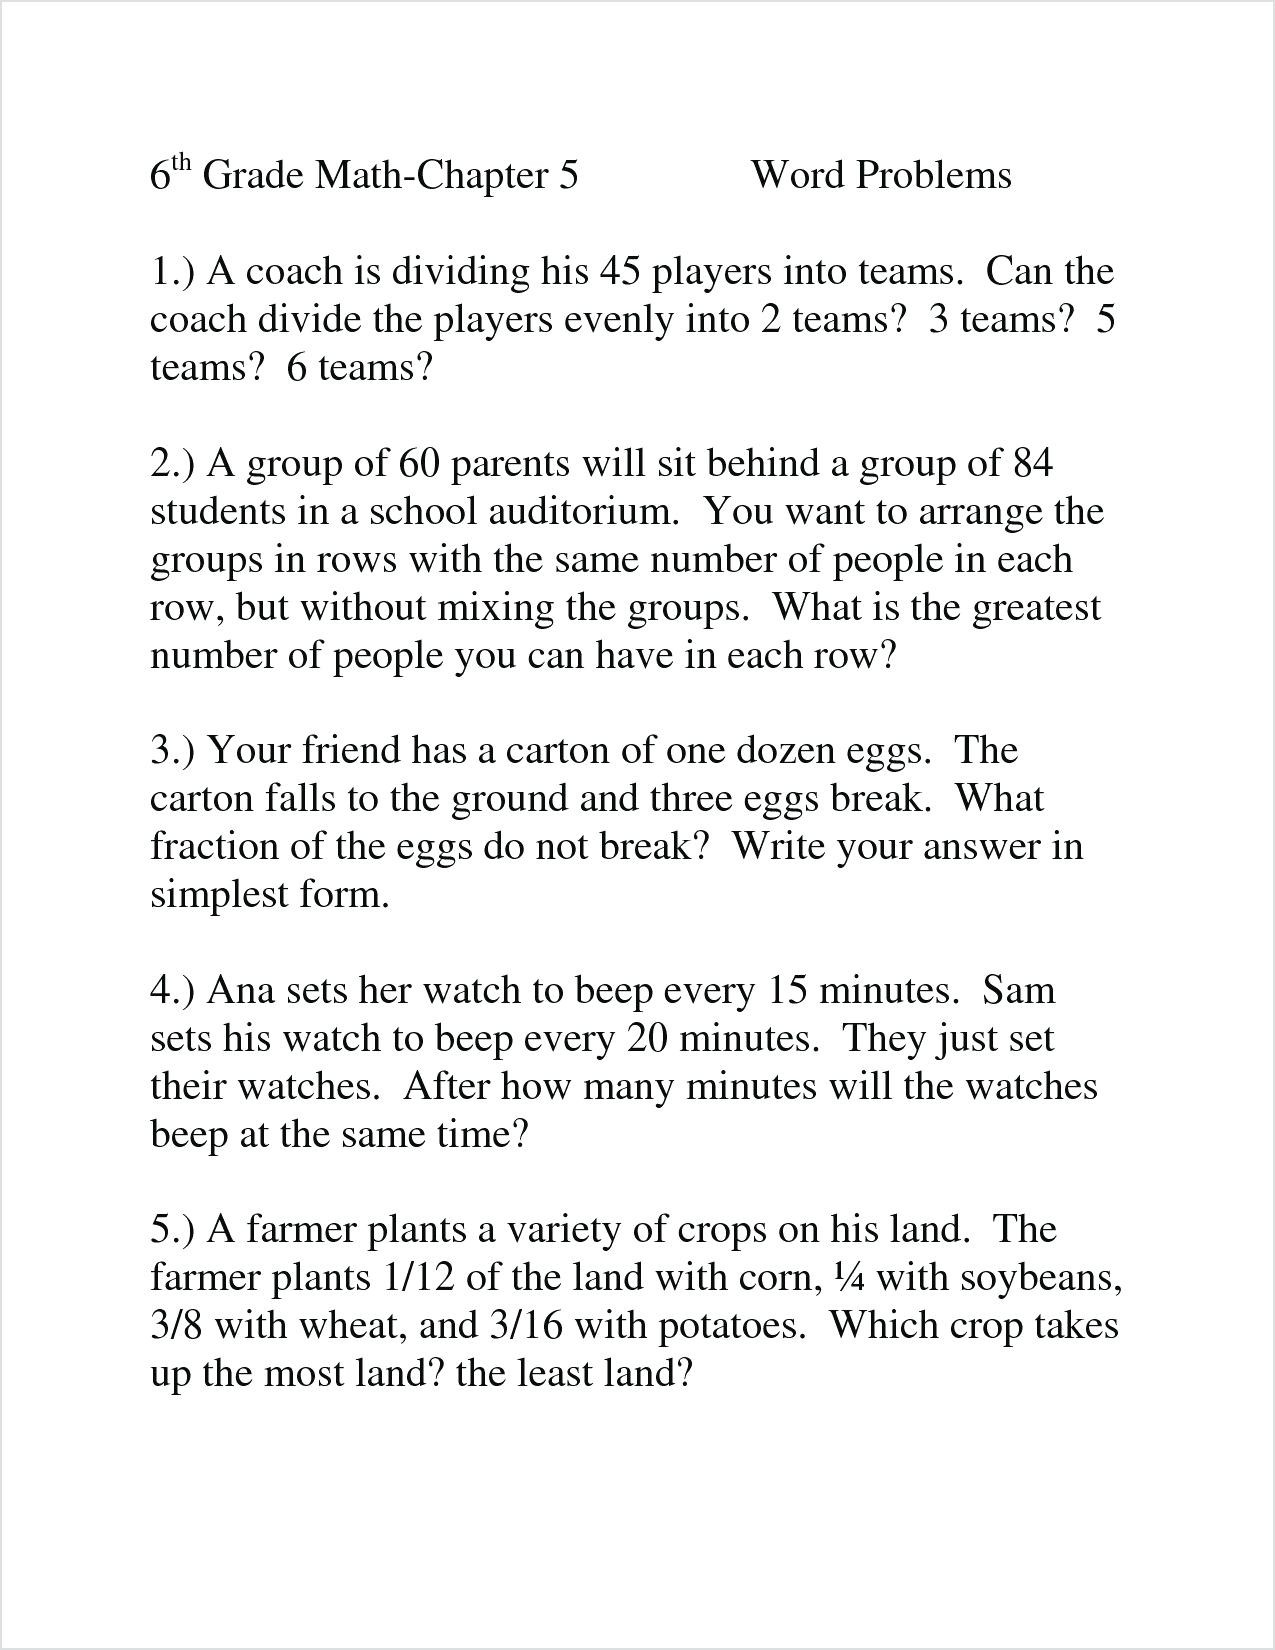 Free Math Worksheets Third Grade 3 Division Word Problems